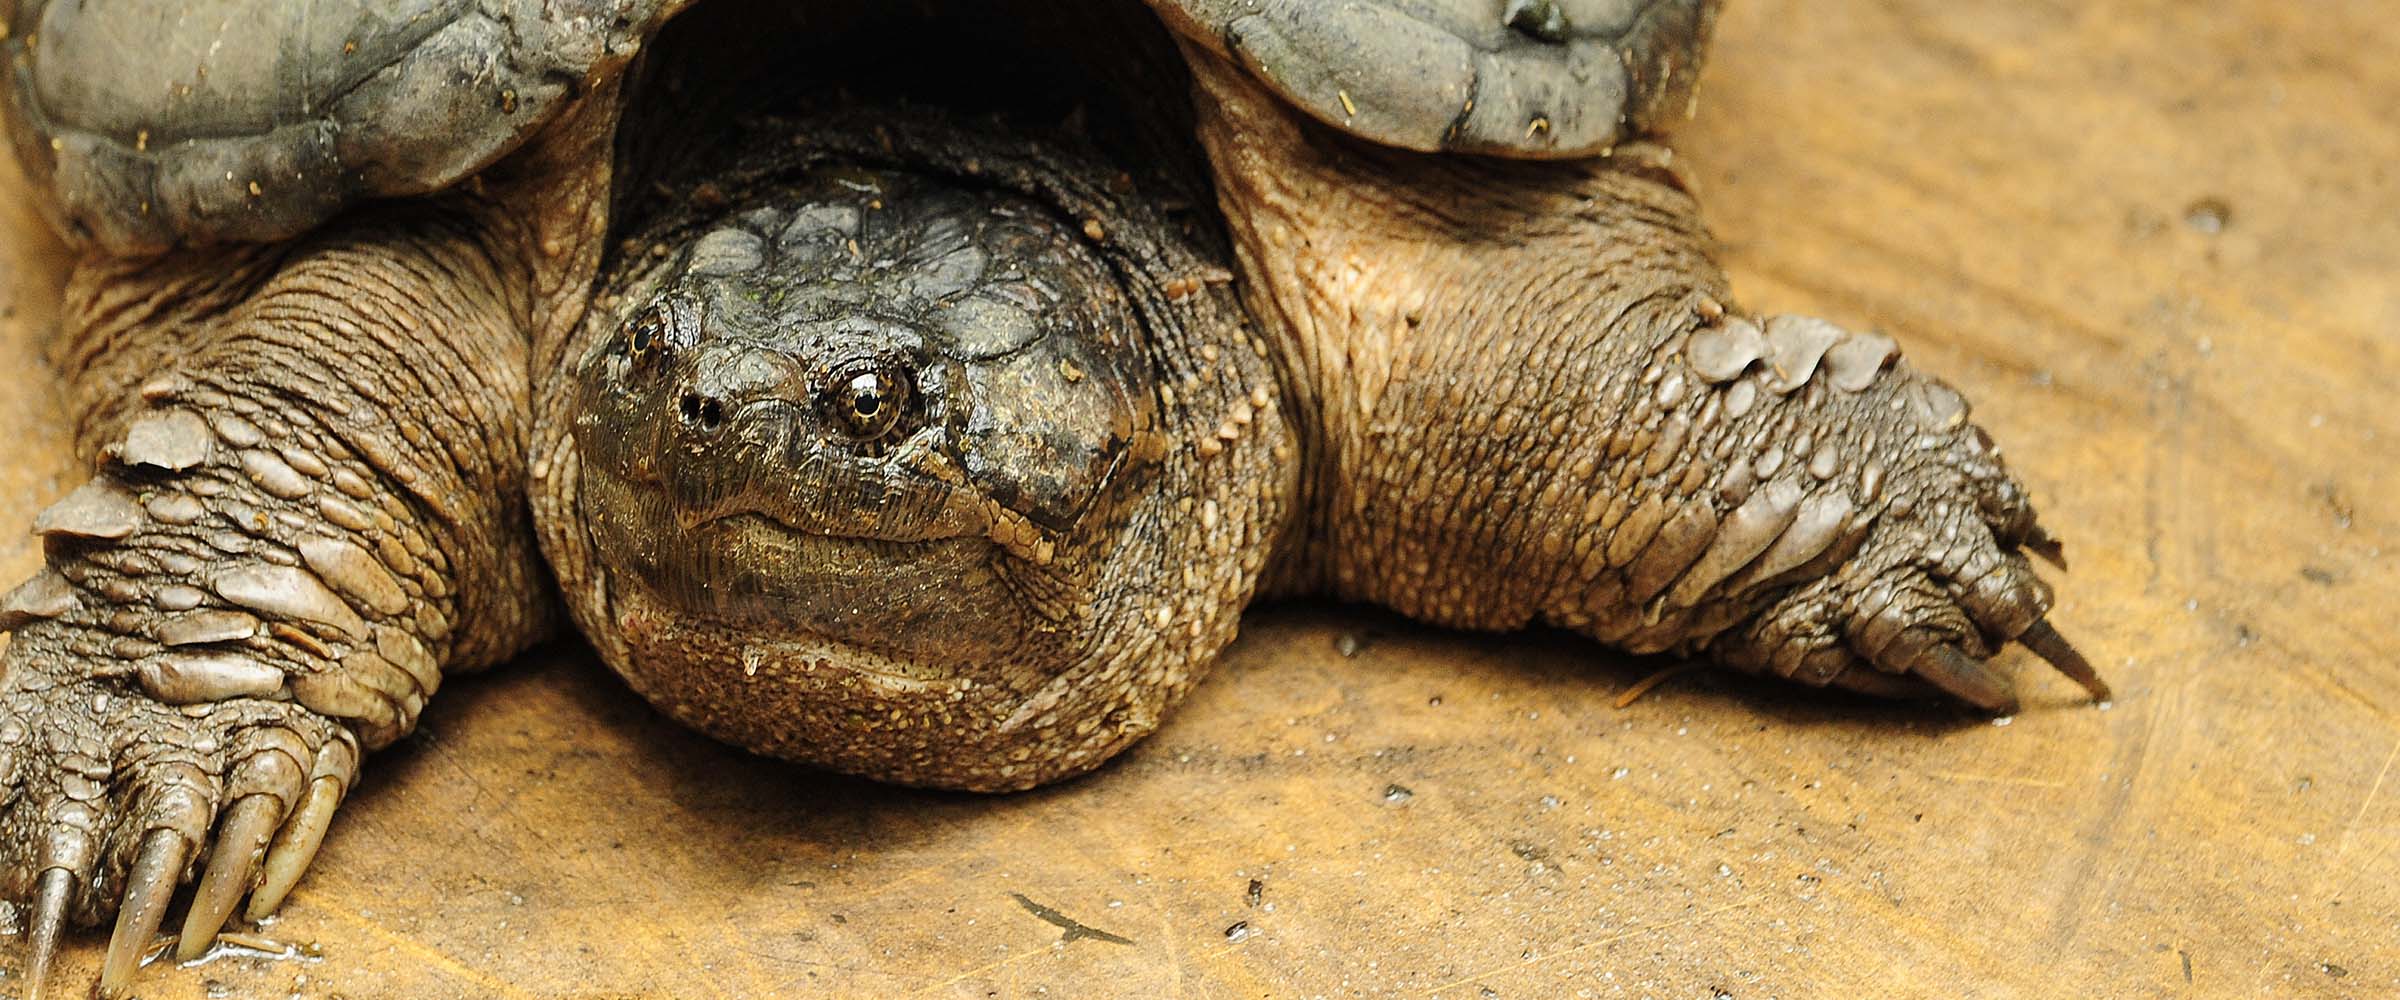 Common Snapping Turtle| Hero Image